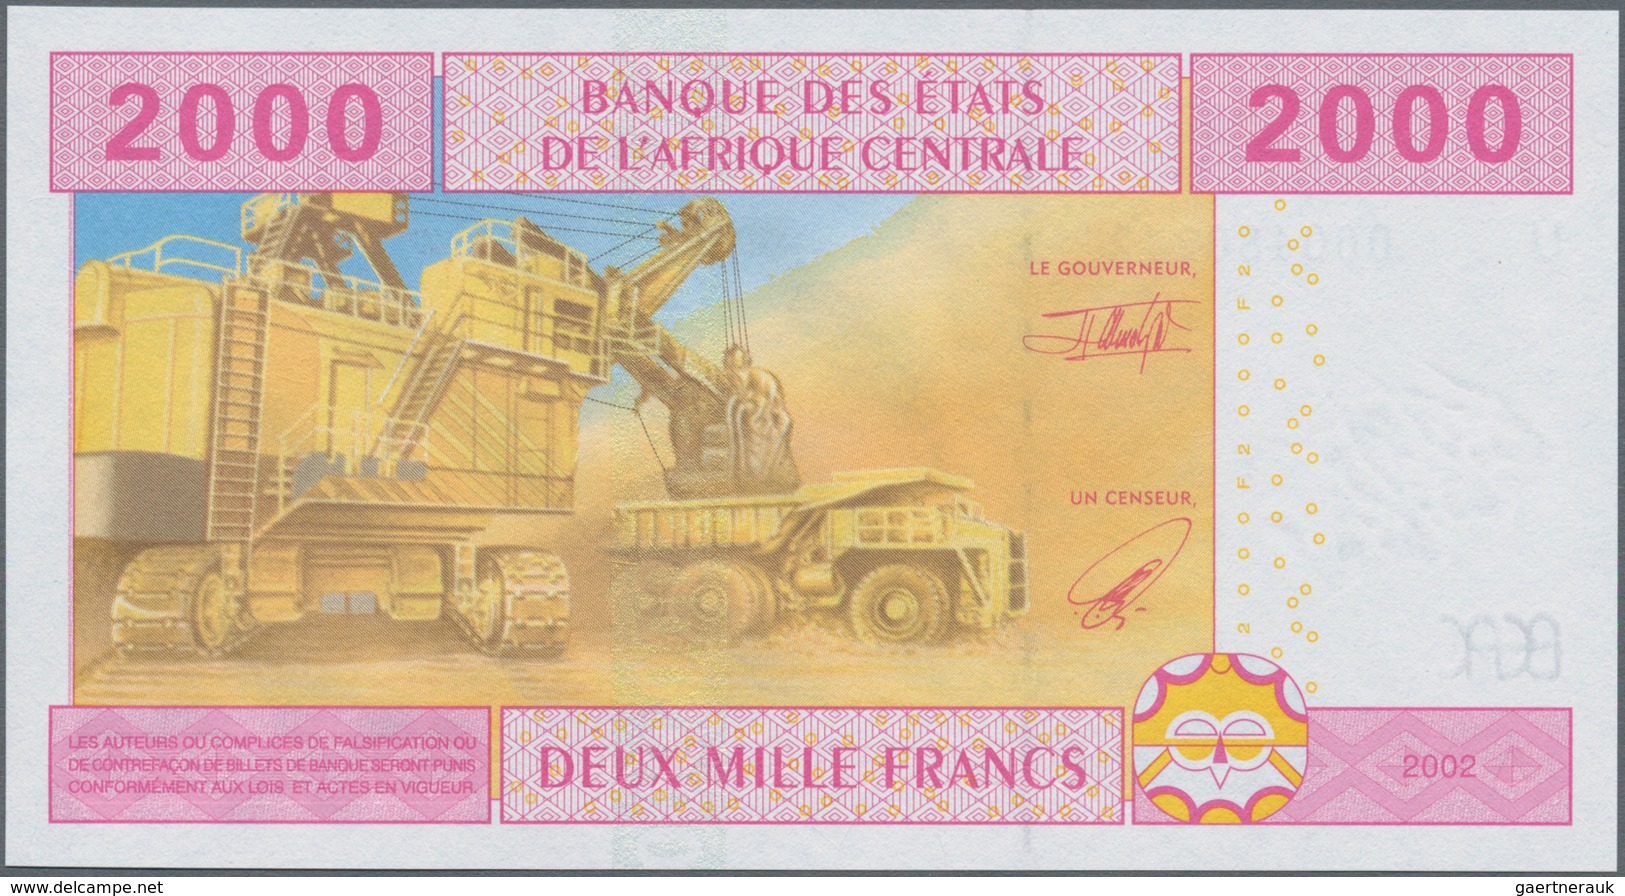 Cameroon / Kamerun: set of 5 notes Central African States containing 4x Cameroon (letter "U") 1000,